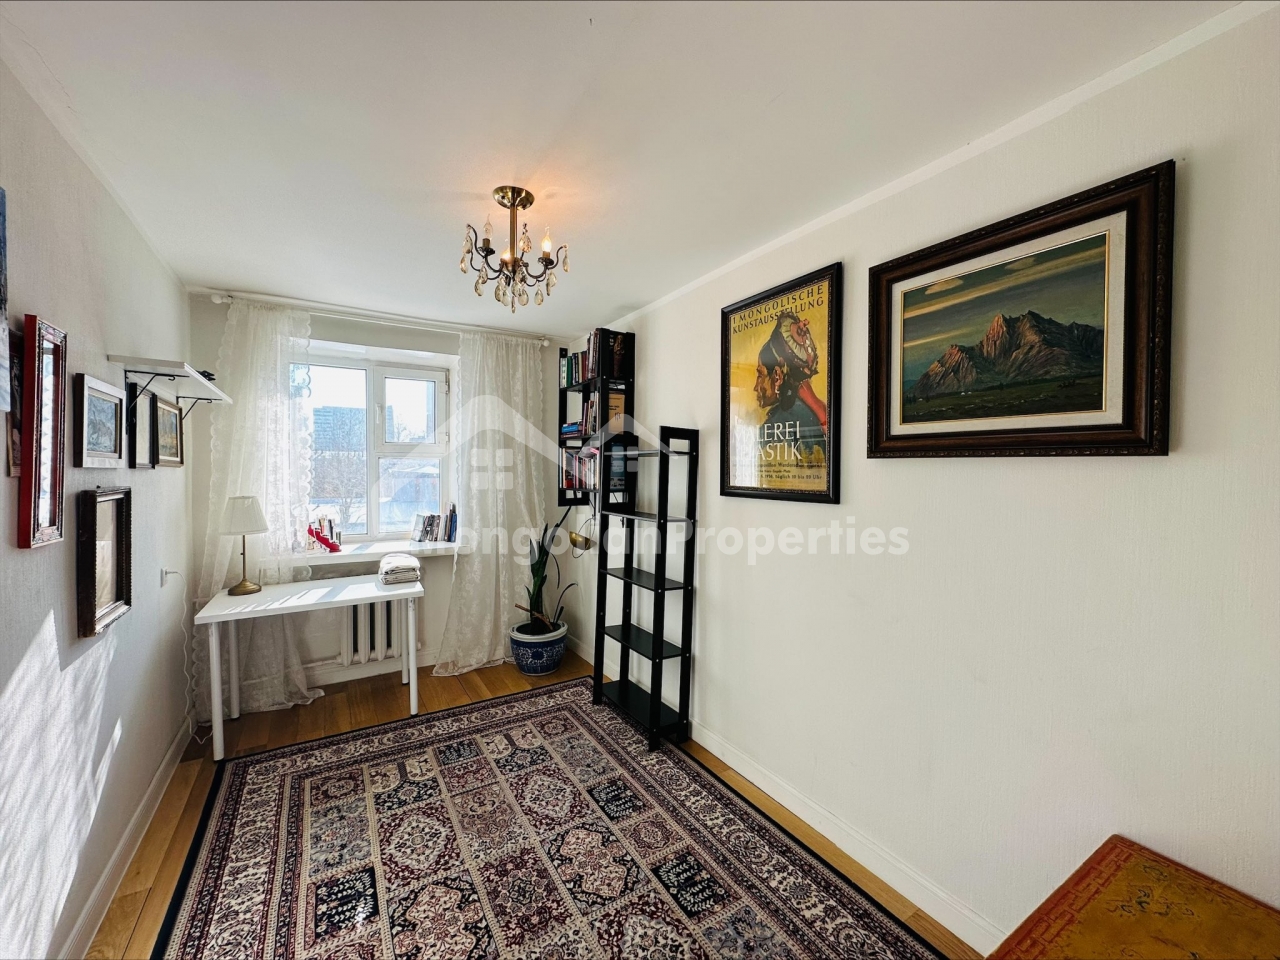 Vintage Style, Cozy 1 bedroom, 1 bathroom apartment is for rent behind the Main square